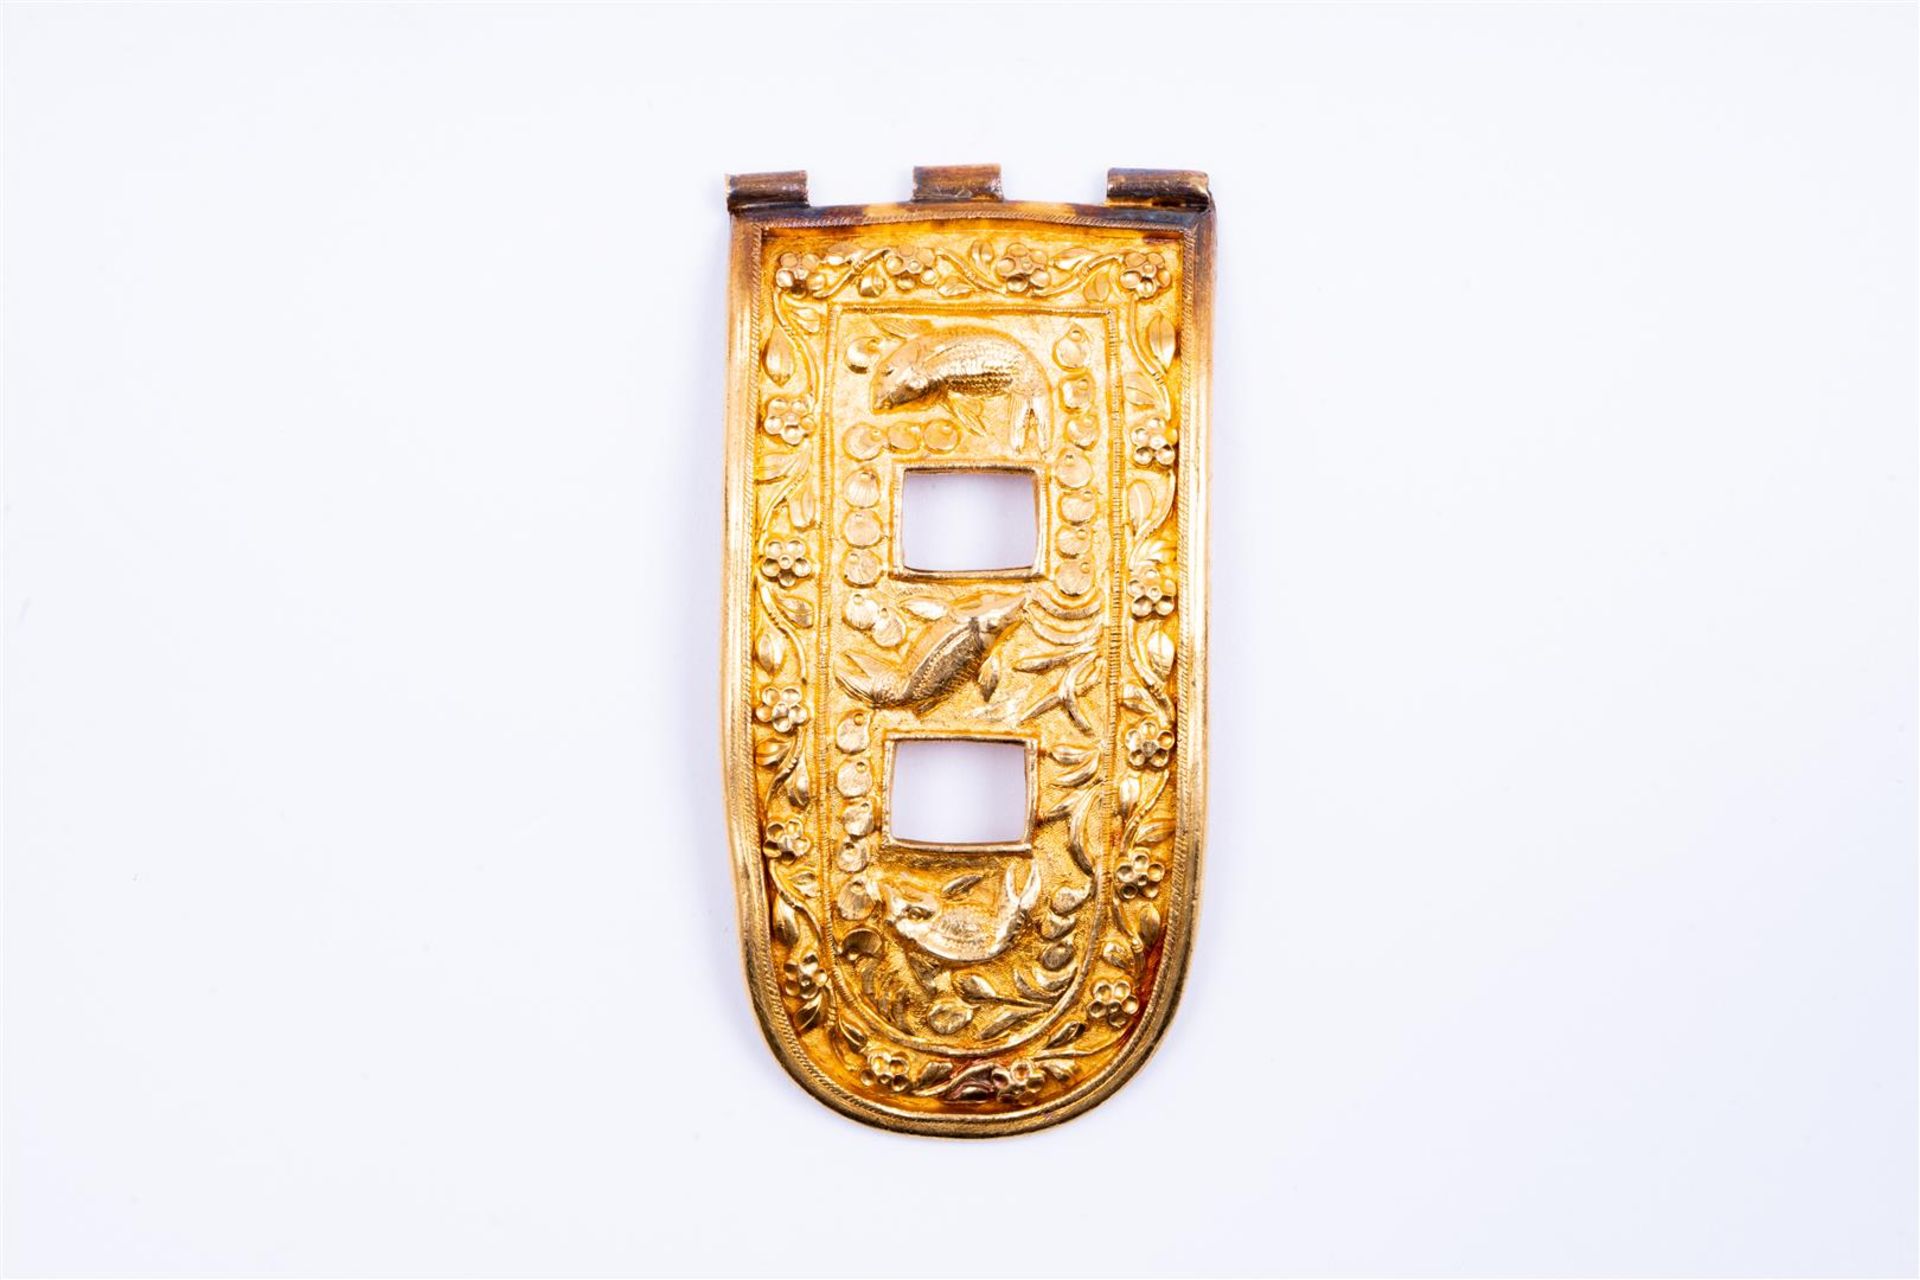 18kt yellow gold buckle/belt part with koi carp. The buckle comes from Indonesia.
This buckle part i